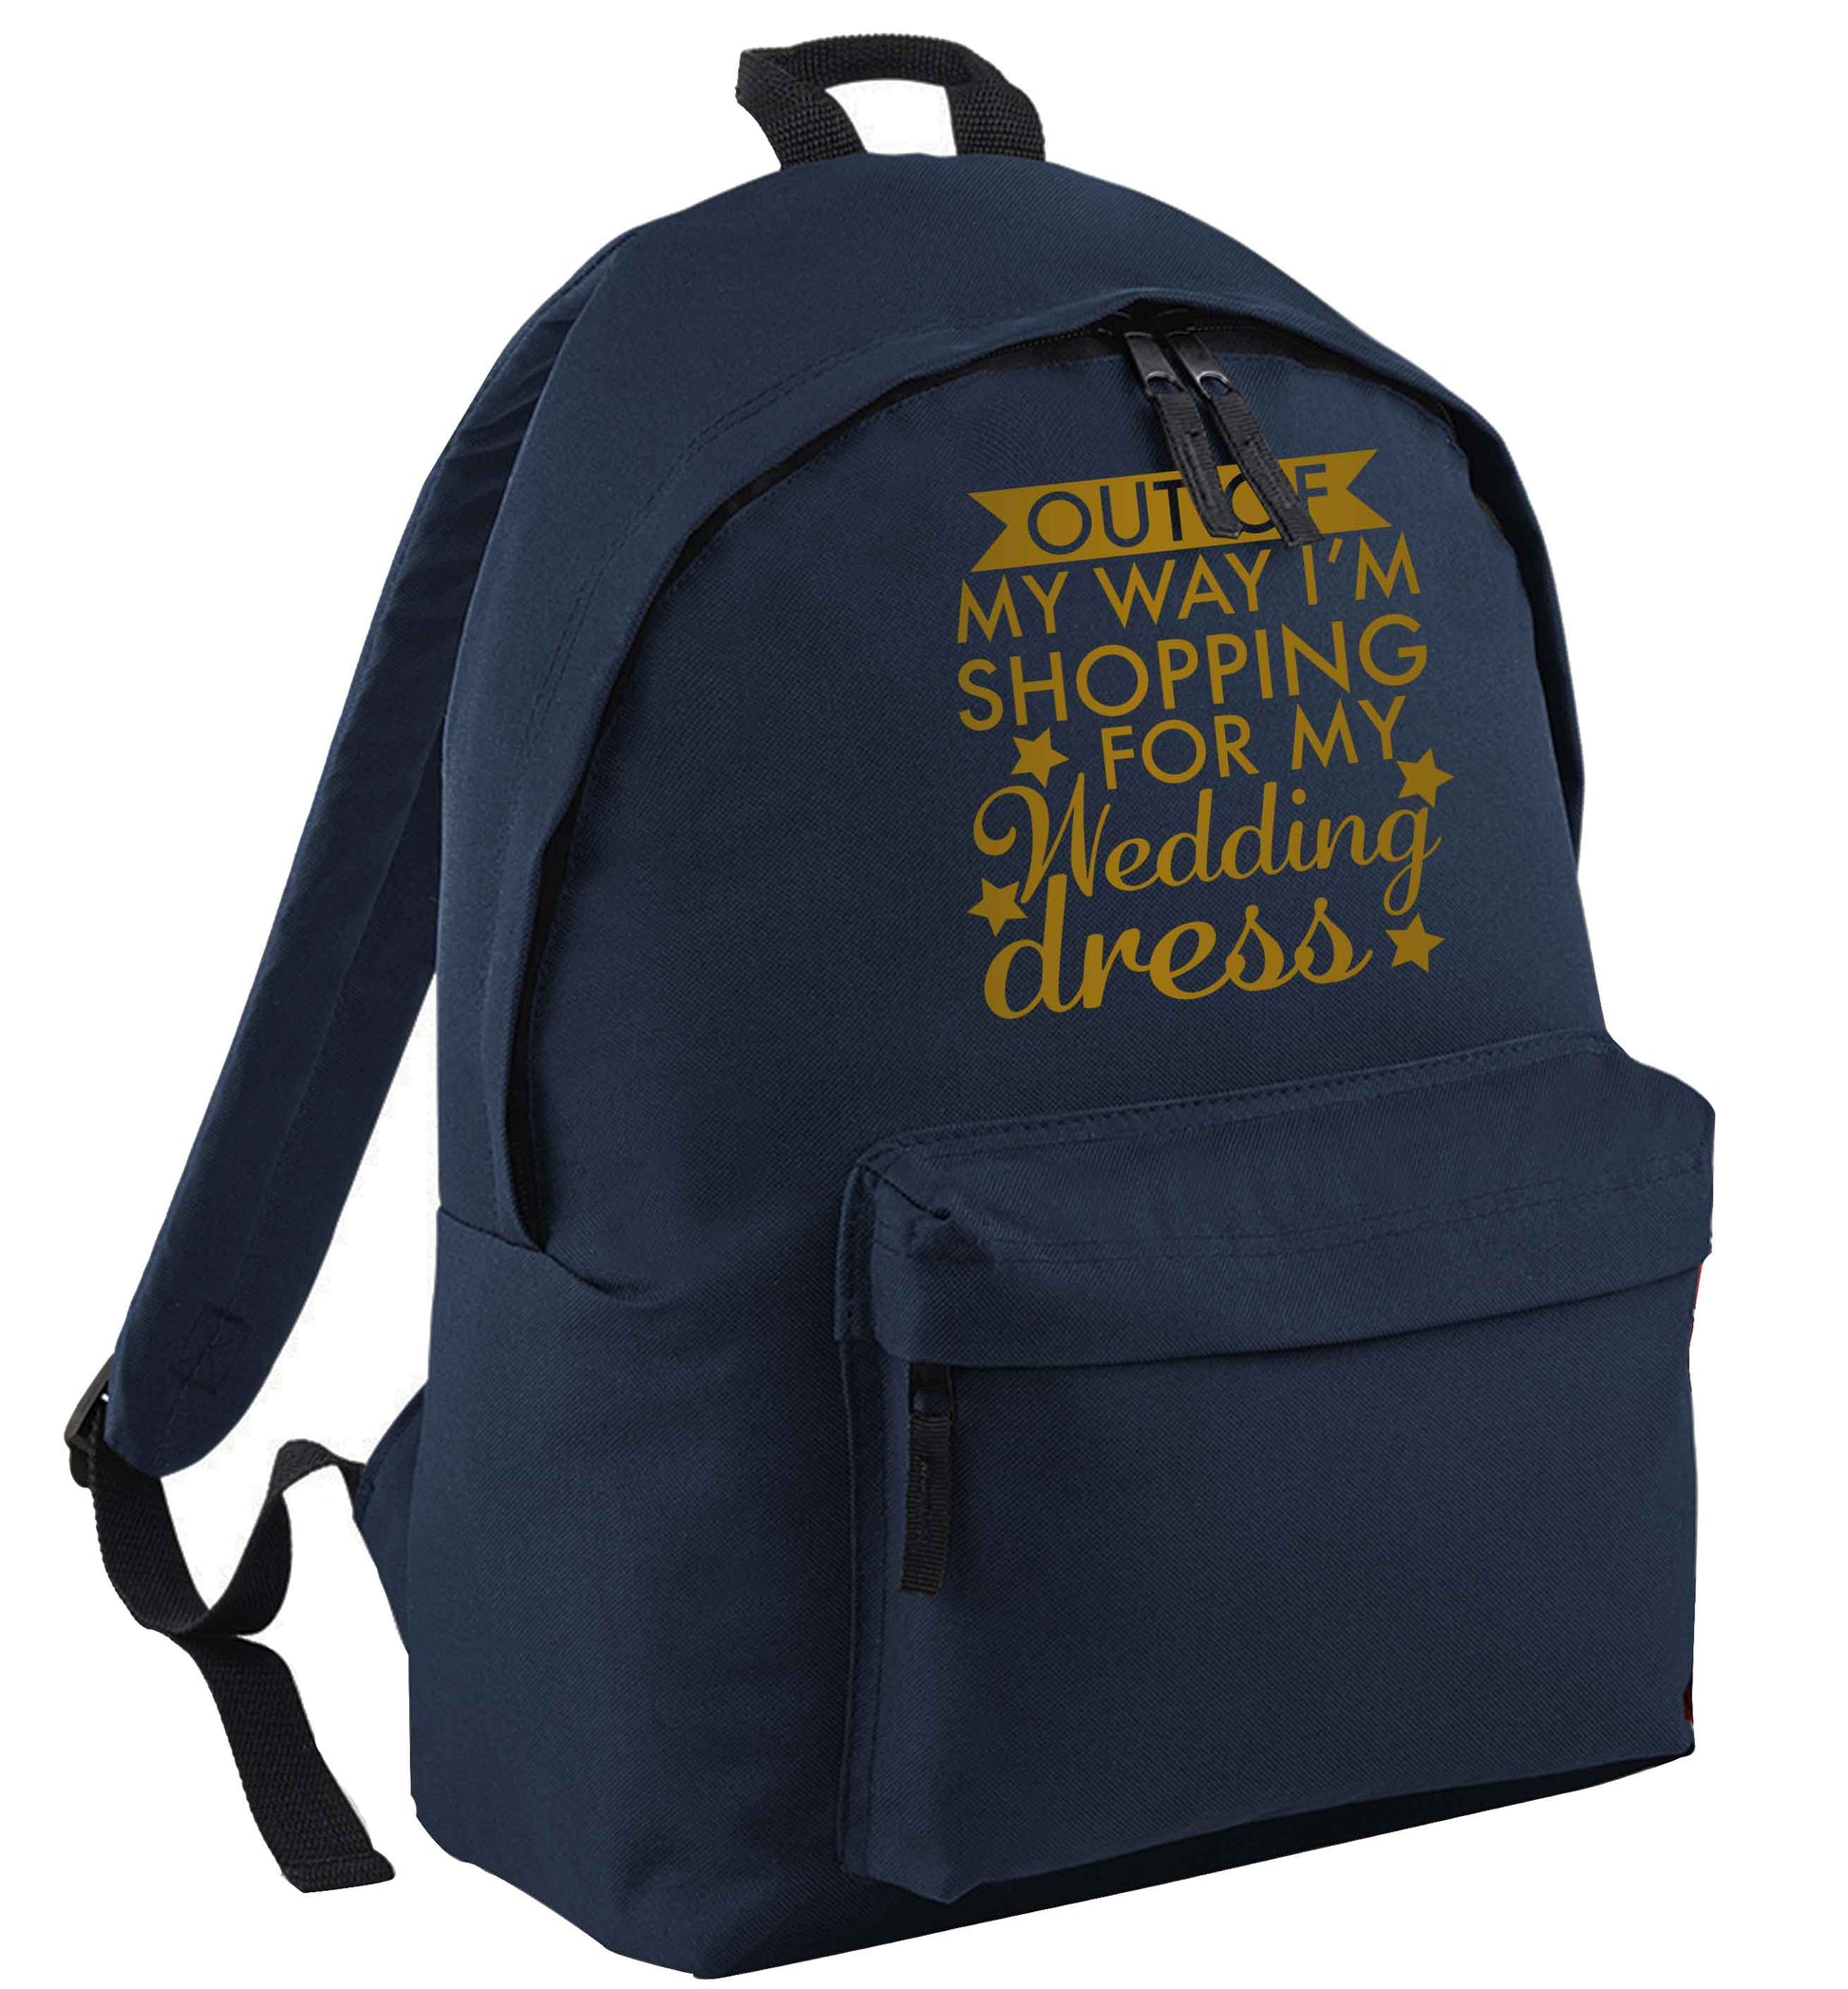 Out of my way I'm shopping for my wedding dress navy adults backpack